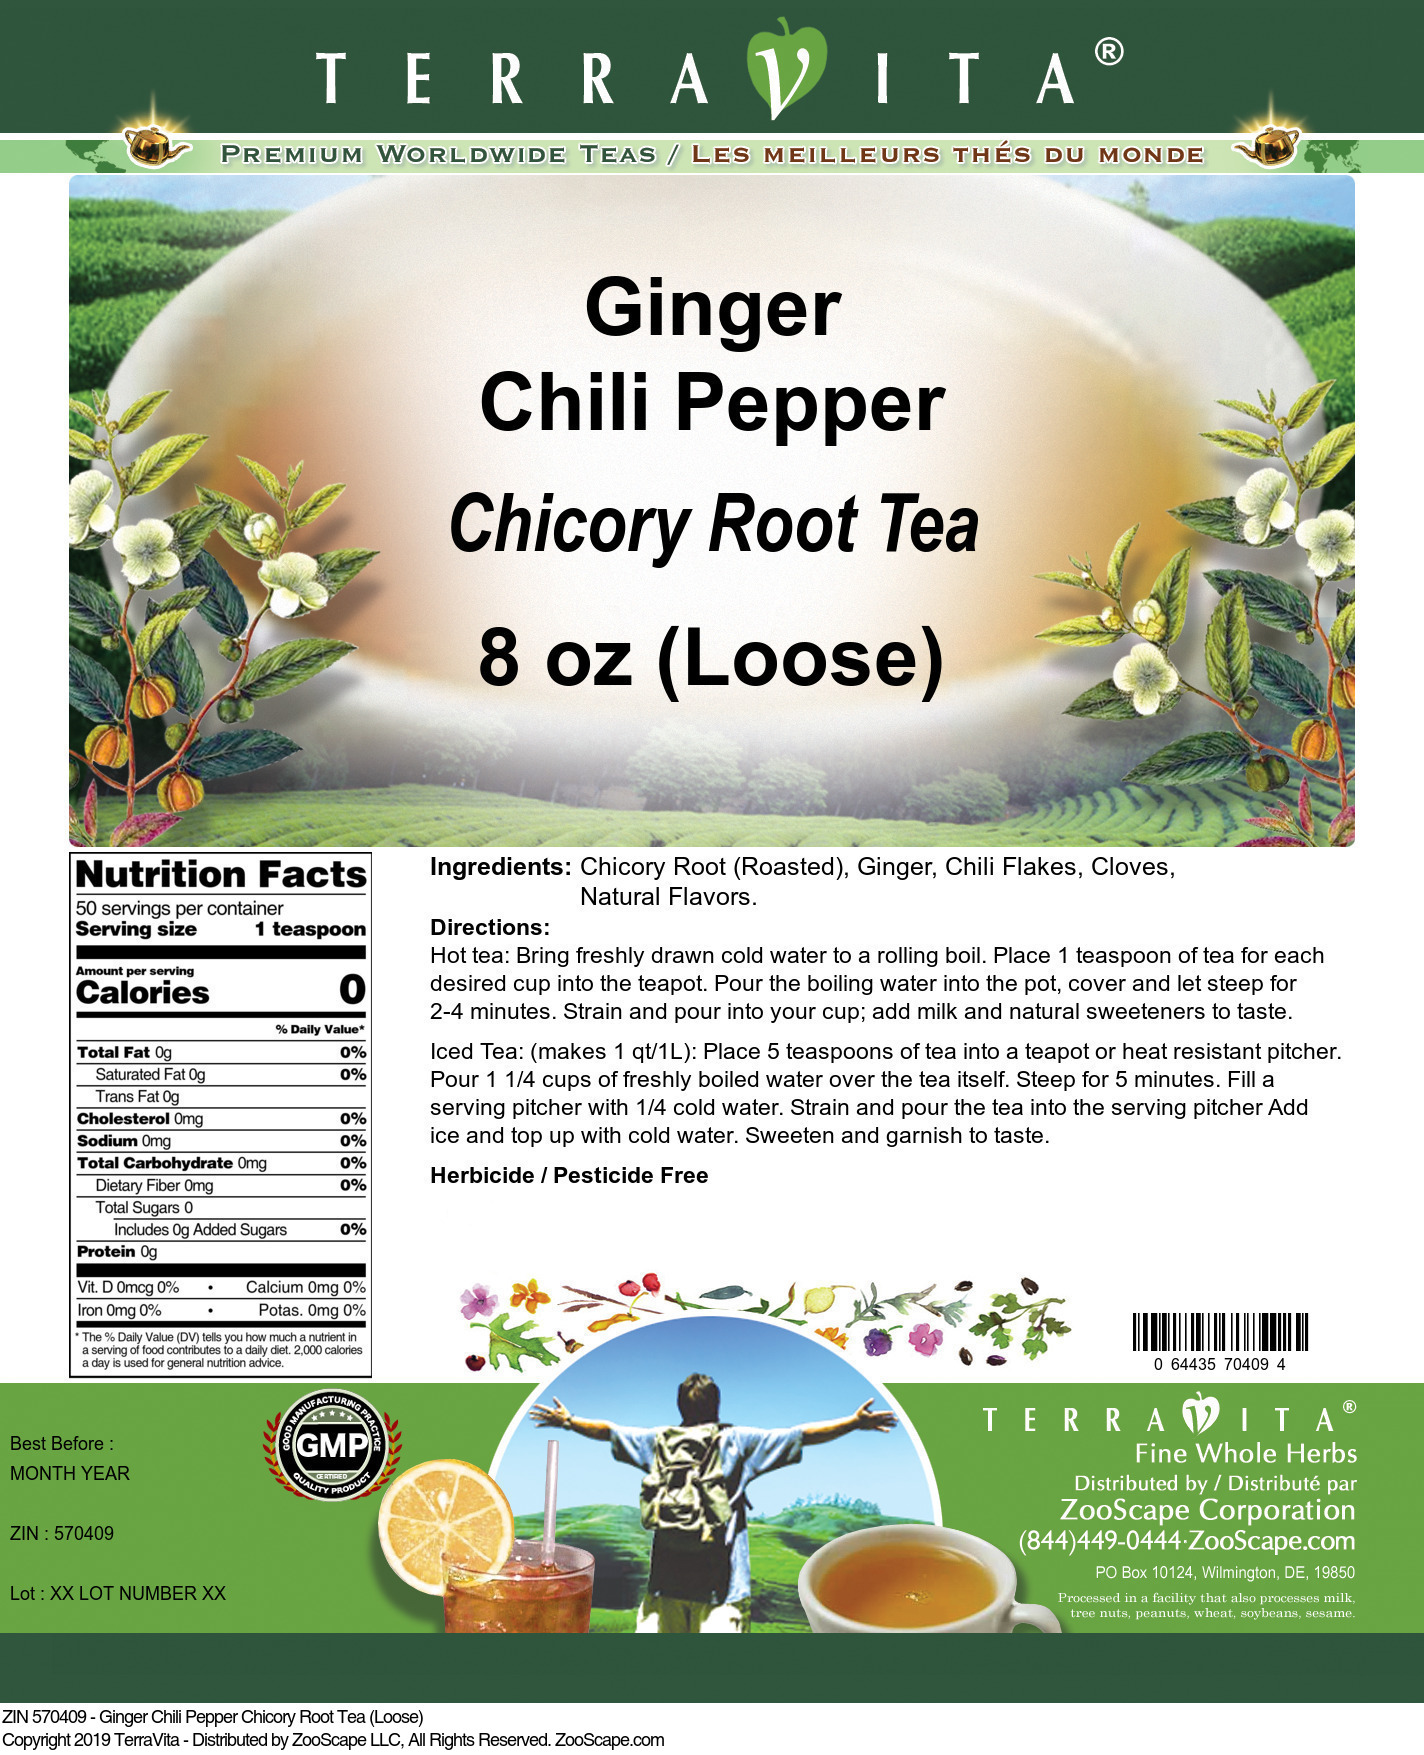 Ginger Chili Pepper Chicory Root Tea (Loose) - Label